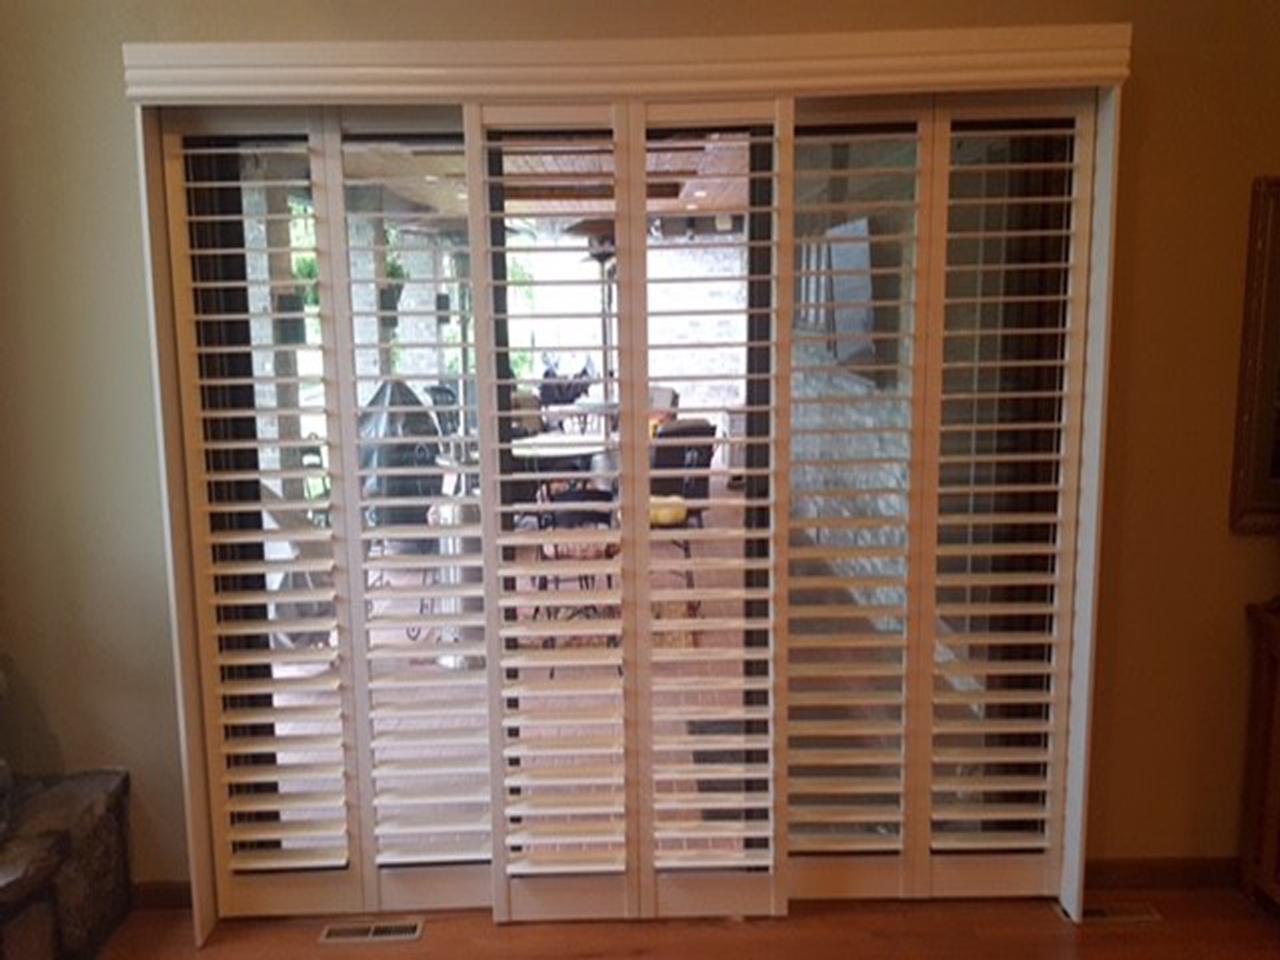 Bypass interior shutters with shutters covering the sliding glass doors with louvers open